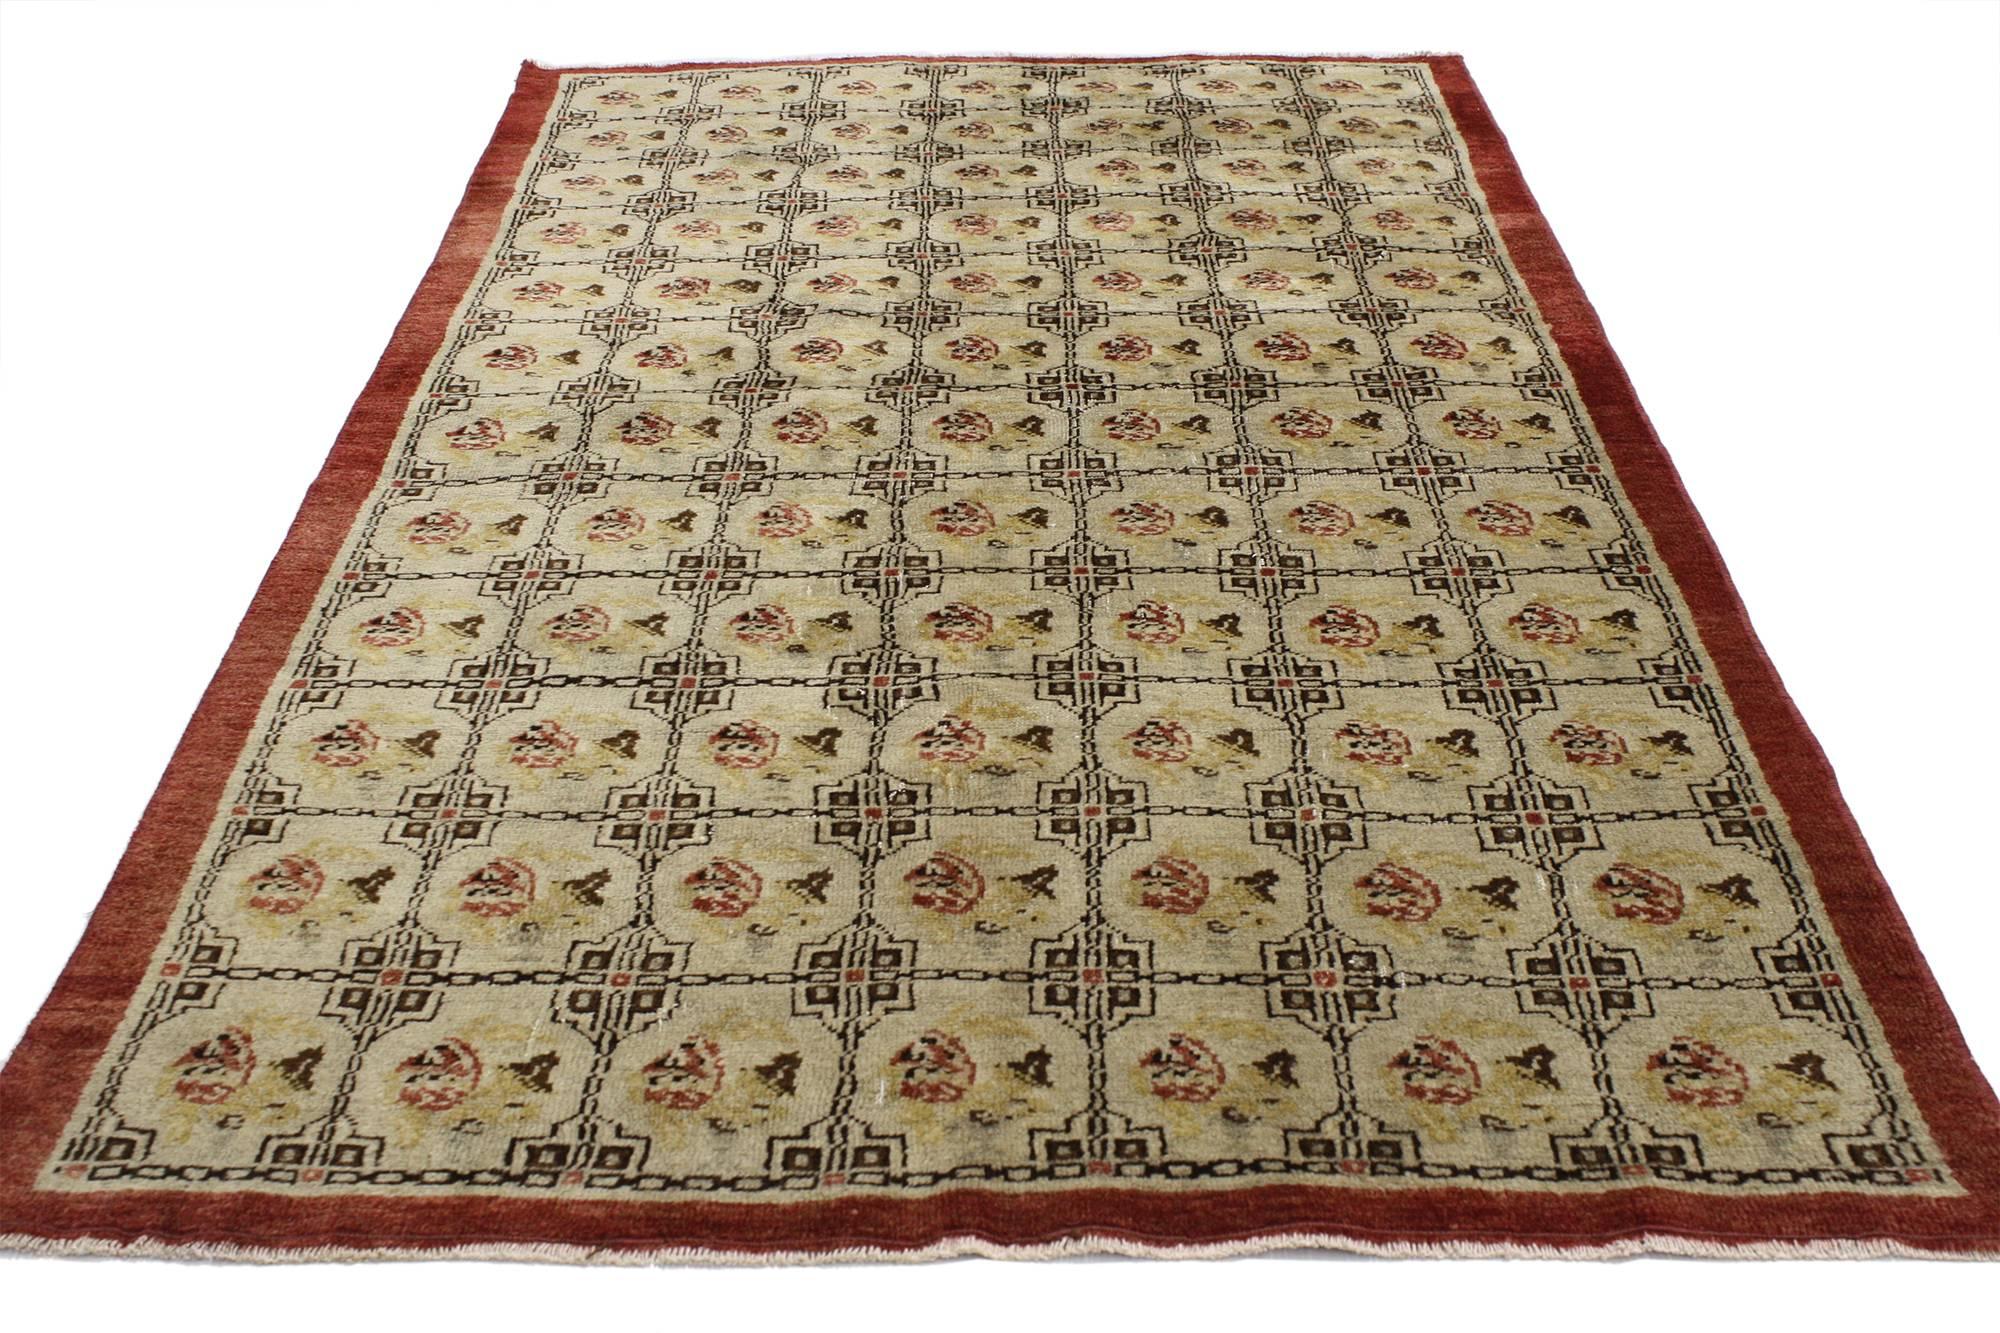 52082, vintage Turkish Oushak Accent rug, entry or foyer rug. This vintage Turkish Oushak rug features a modern traditional style and an allover compartment panel design composed of stylized roses. Immersed in Anatolian history and refined colors,